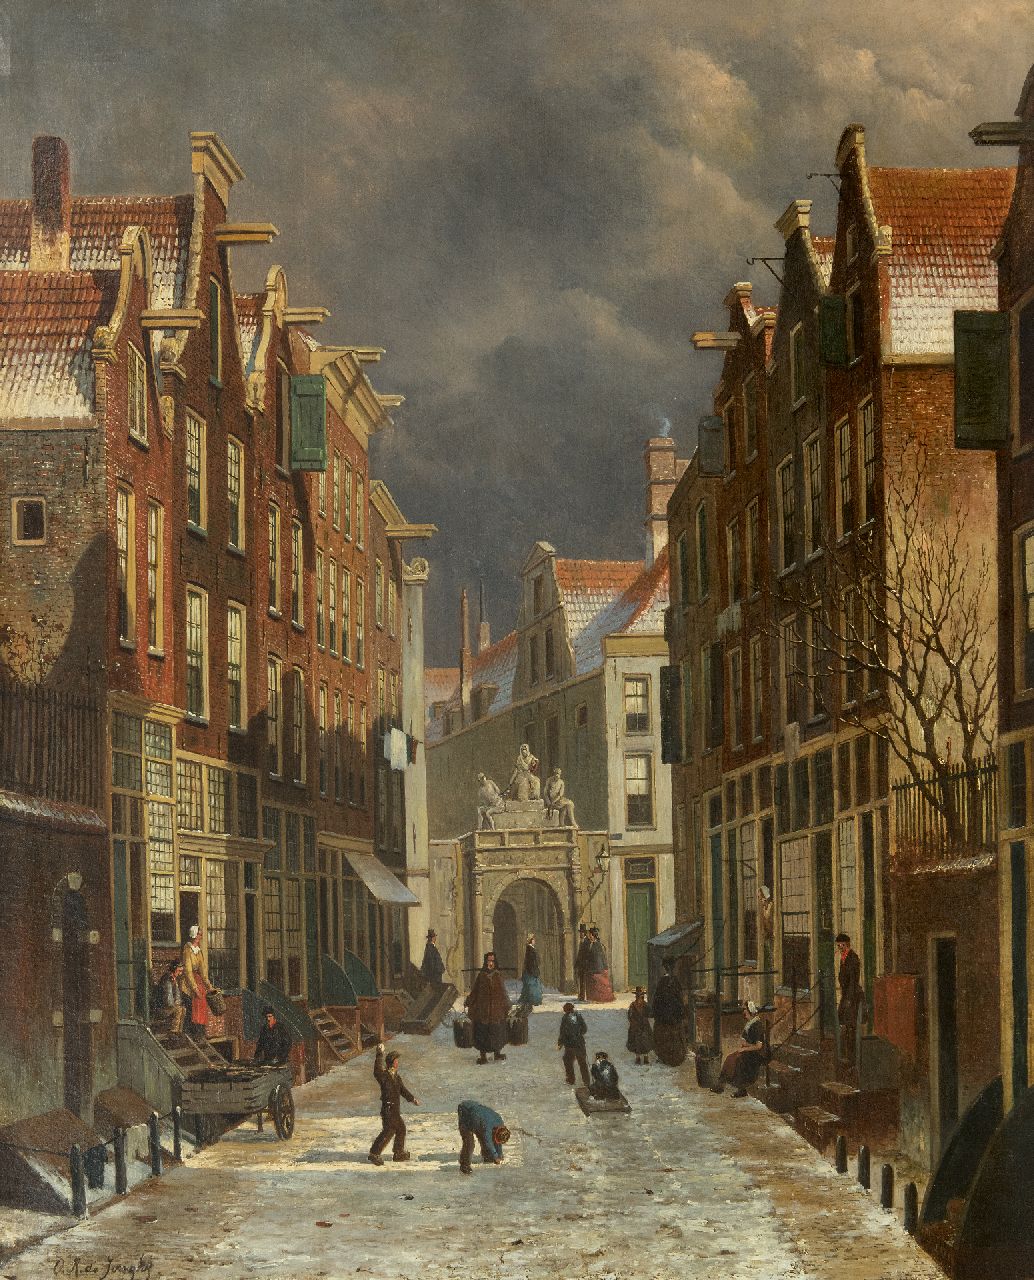 Jongh O.R. de | Oene Romkes de Jongh | Paintings offered for sale | View on the Voetboogstraat with the Rasphuispoort, Amsterdam, oil on canvas 86.8 x 70.4 cm, signed l.l.